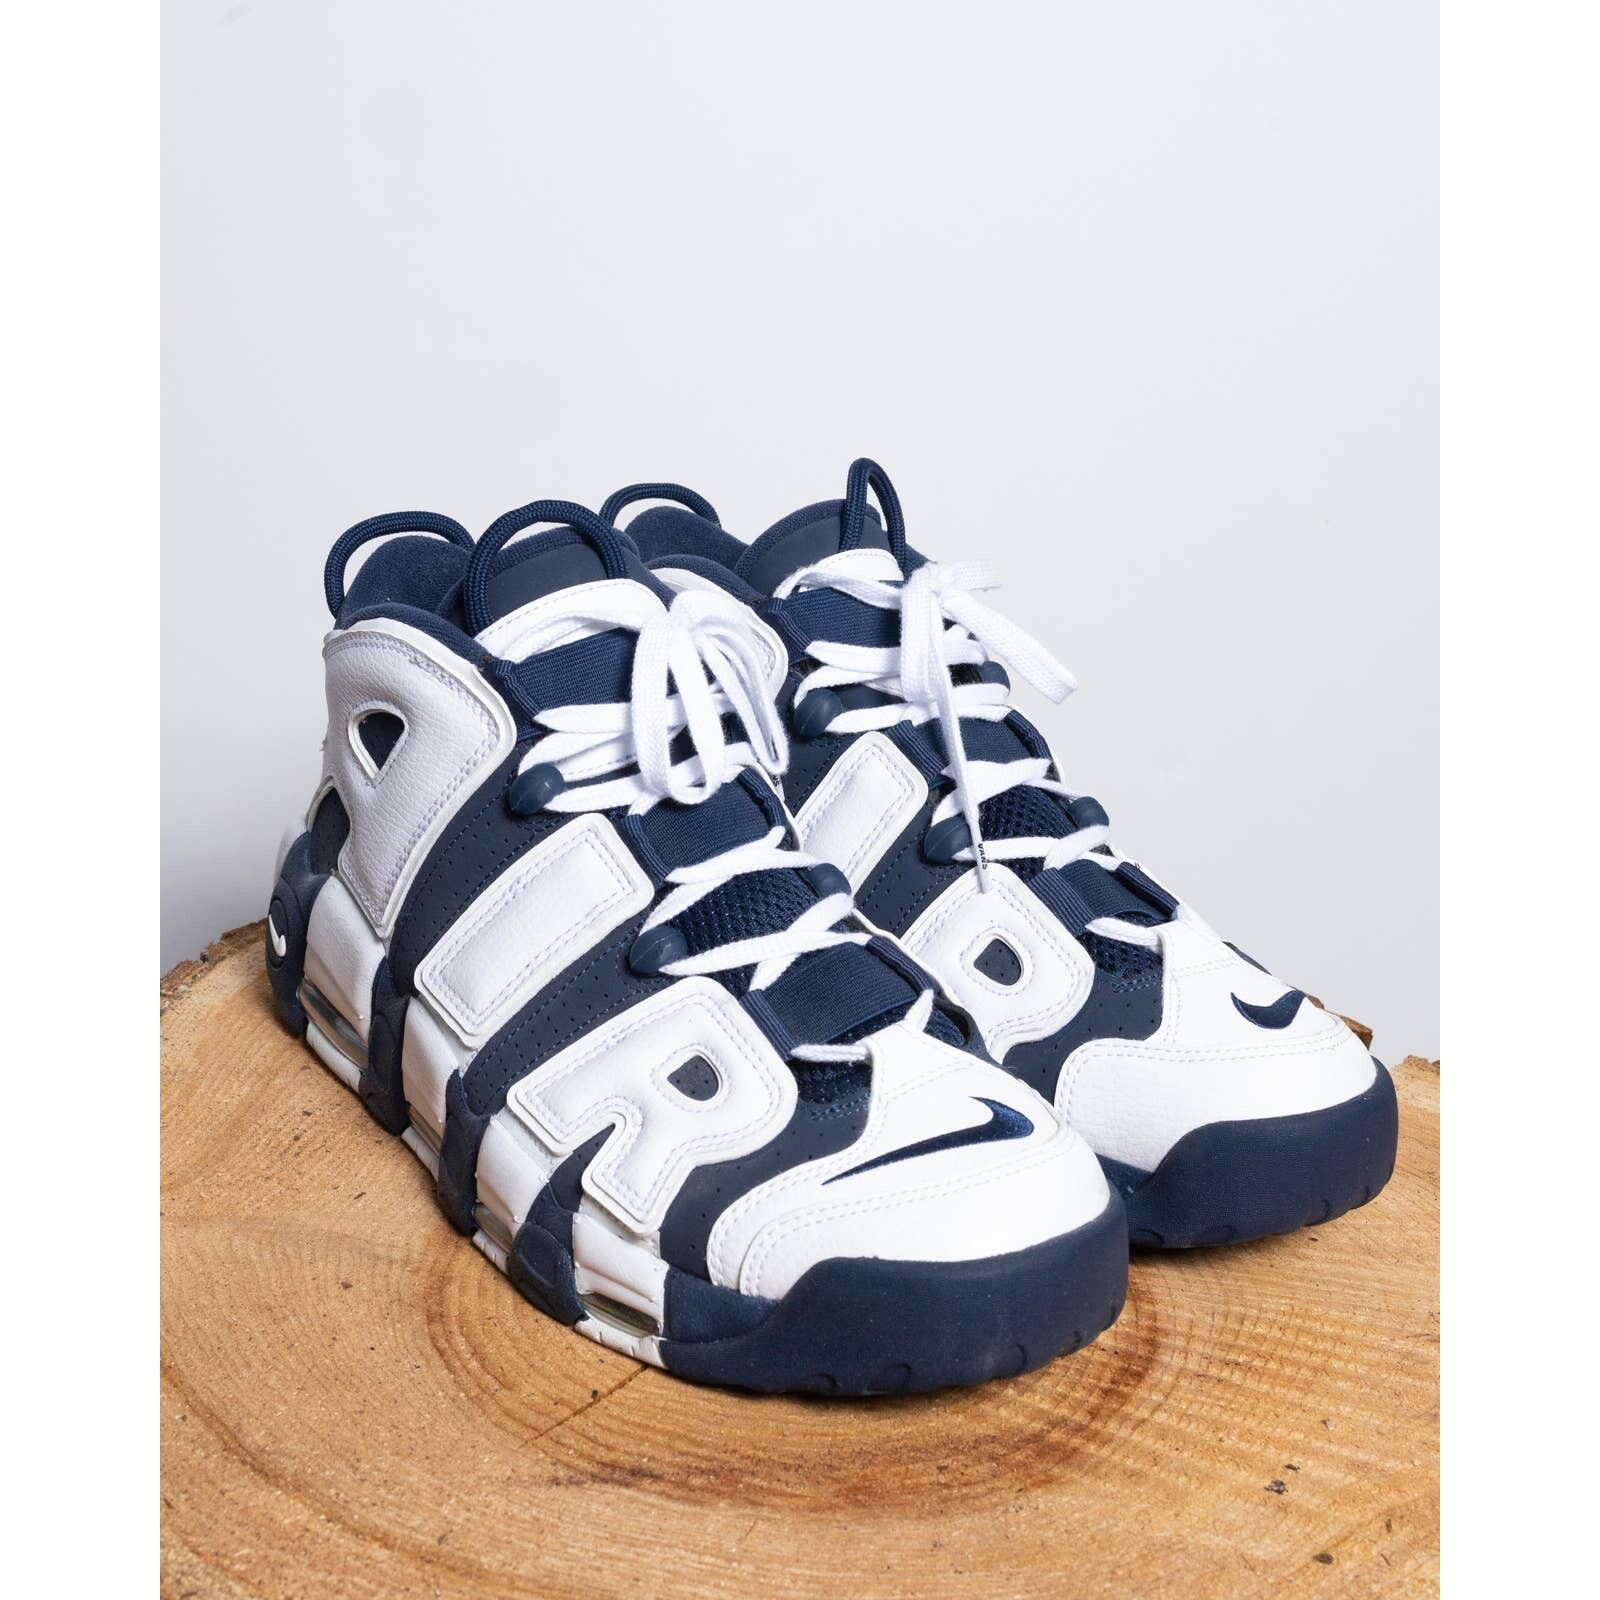 Pre-owned Nike Air More Uptempo Olympic Size 11 Blue White 414962-104 Shoes